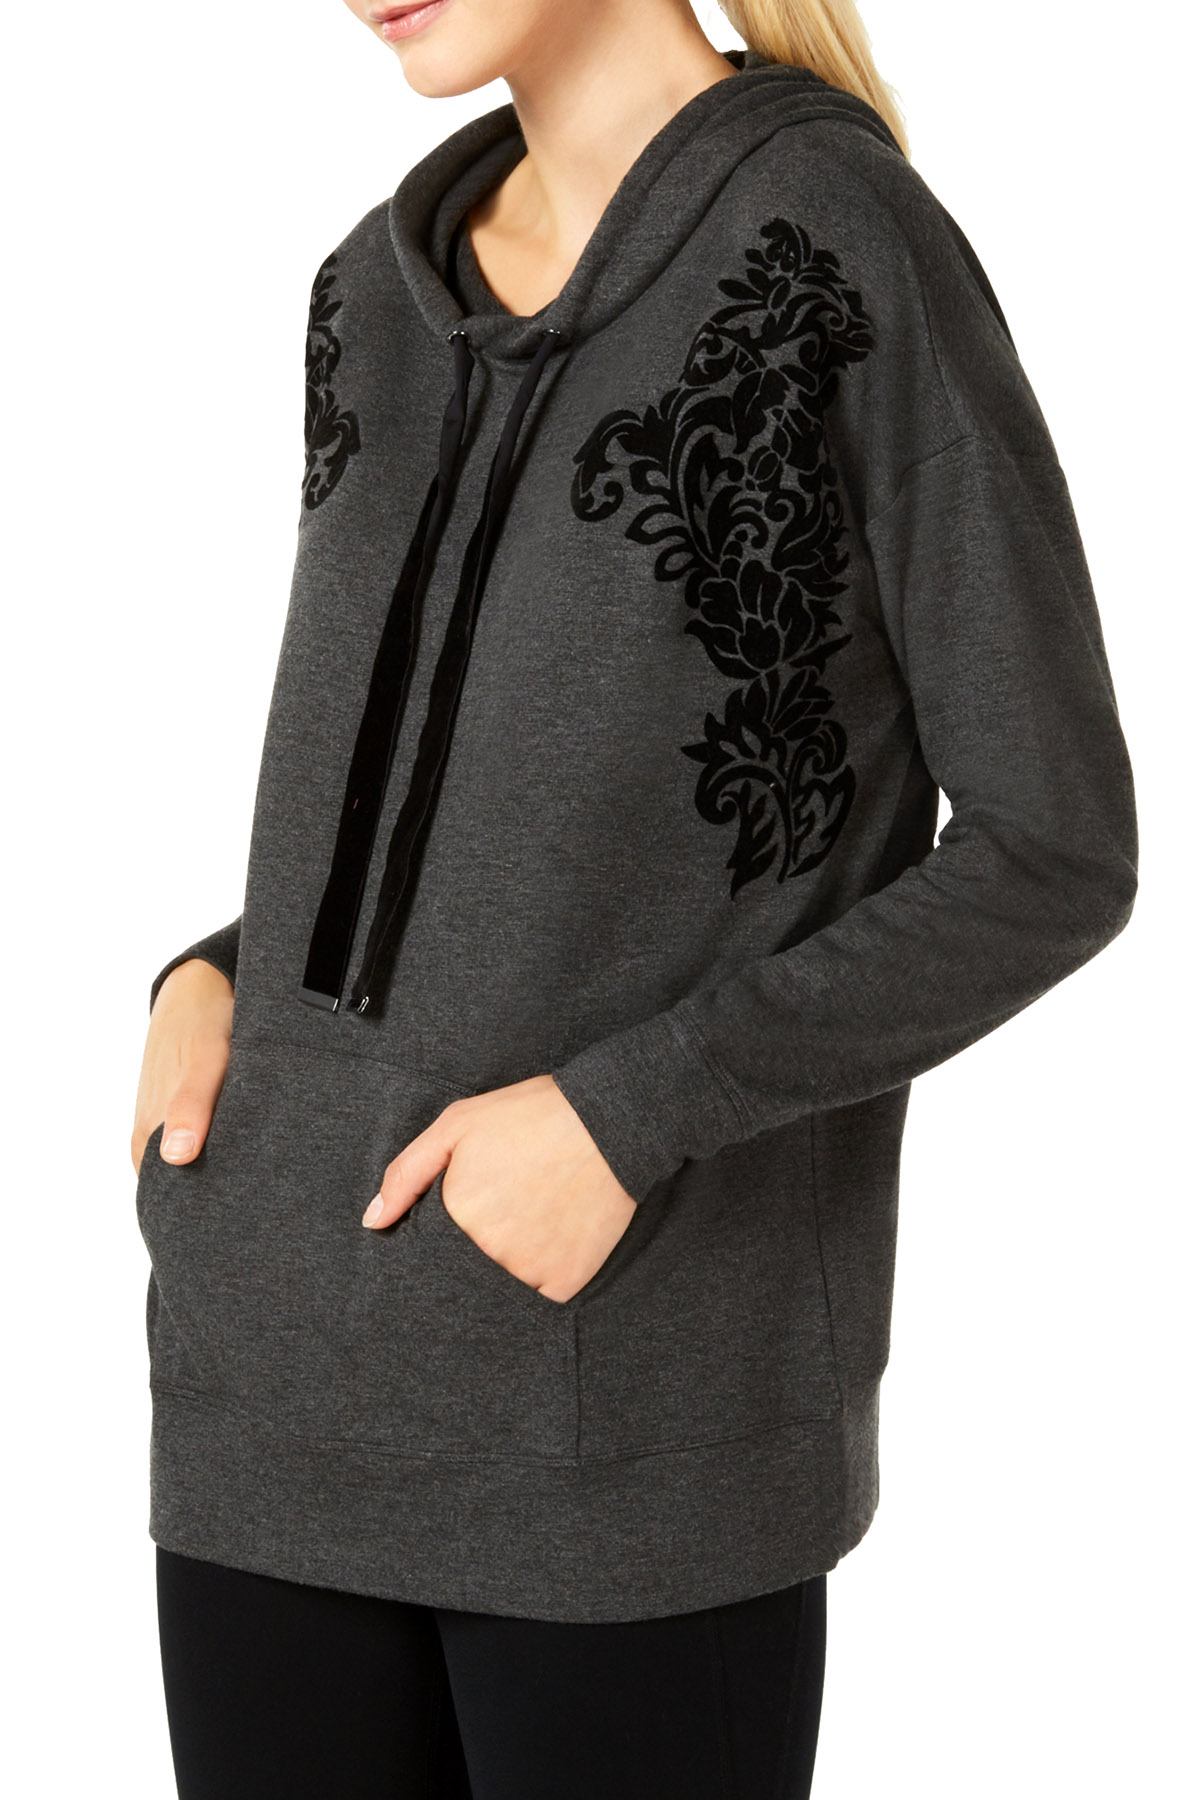 Ideology Charcoal Heather Flocked Hoodie